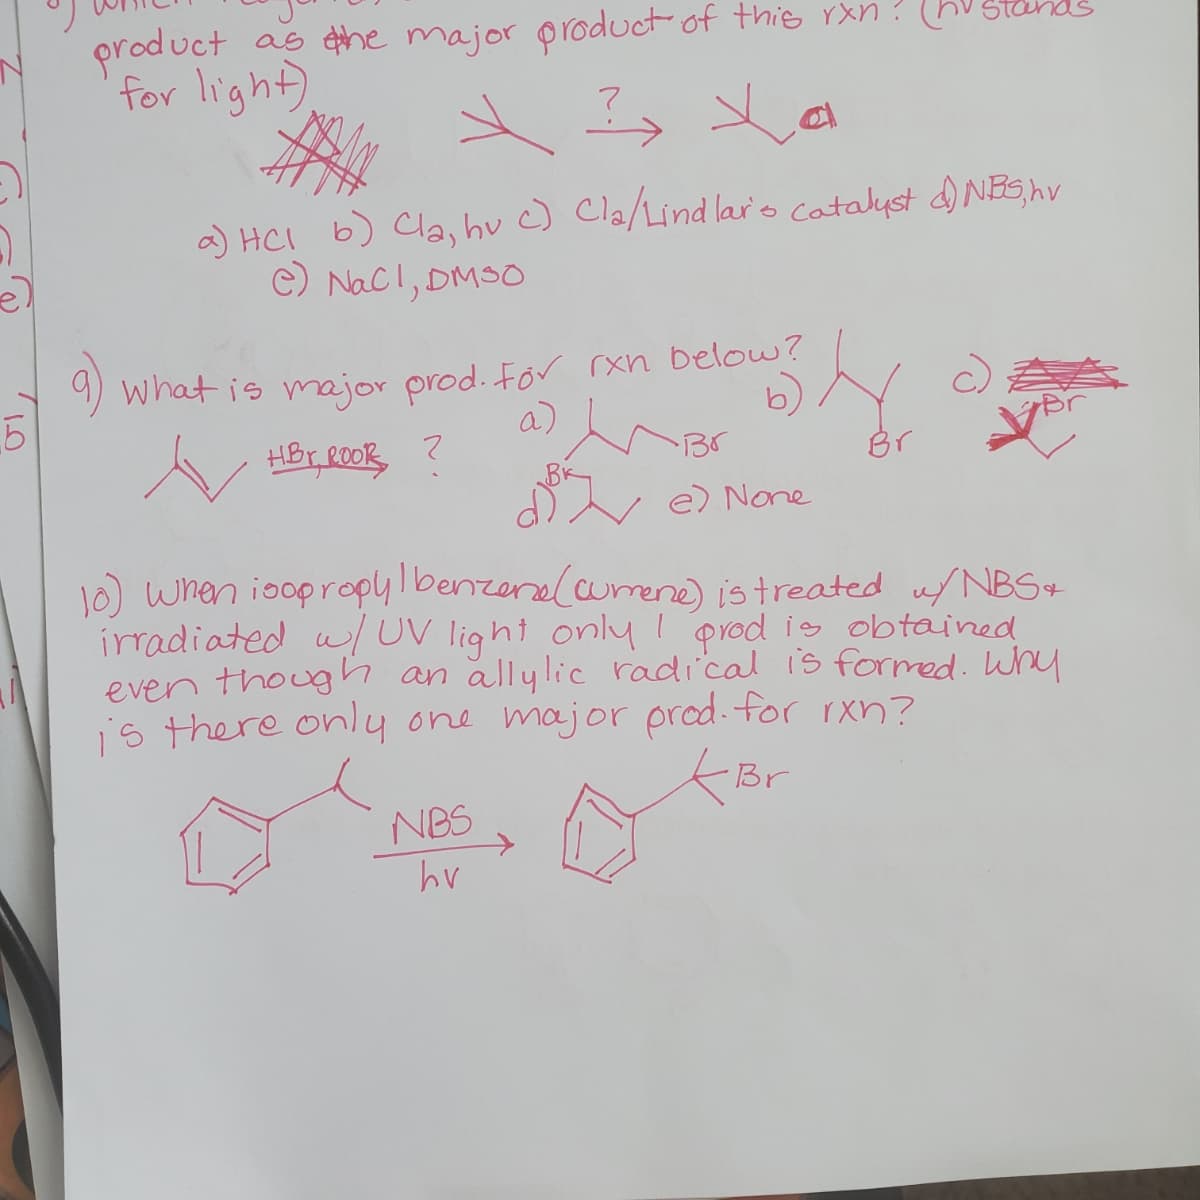 product
as ehe major product of this rxn? (hV Stan
for light)
a) HCI b) Cla, hu c) Cla/Lind lars Catalyst d NES,hv
c) Nacl, DMSO
9) what is major prod. For rxn below?
a)
b)
HBr ROOR
Br
Br
d e) None
10) wnen ioopropylbenzenal cumene) istreated u/ NBS+
irradiated u/UV light only 1 prod is obtained
even though an allylic radical is formed. Why
is there only one major prod.for rxn?
Br
NBS
hv
